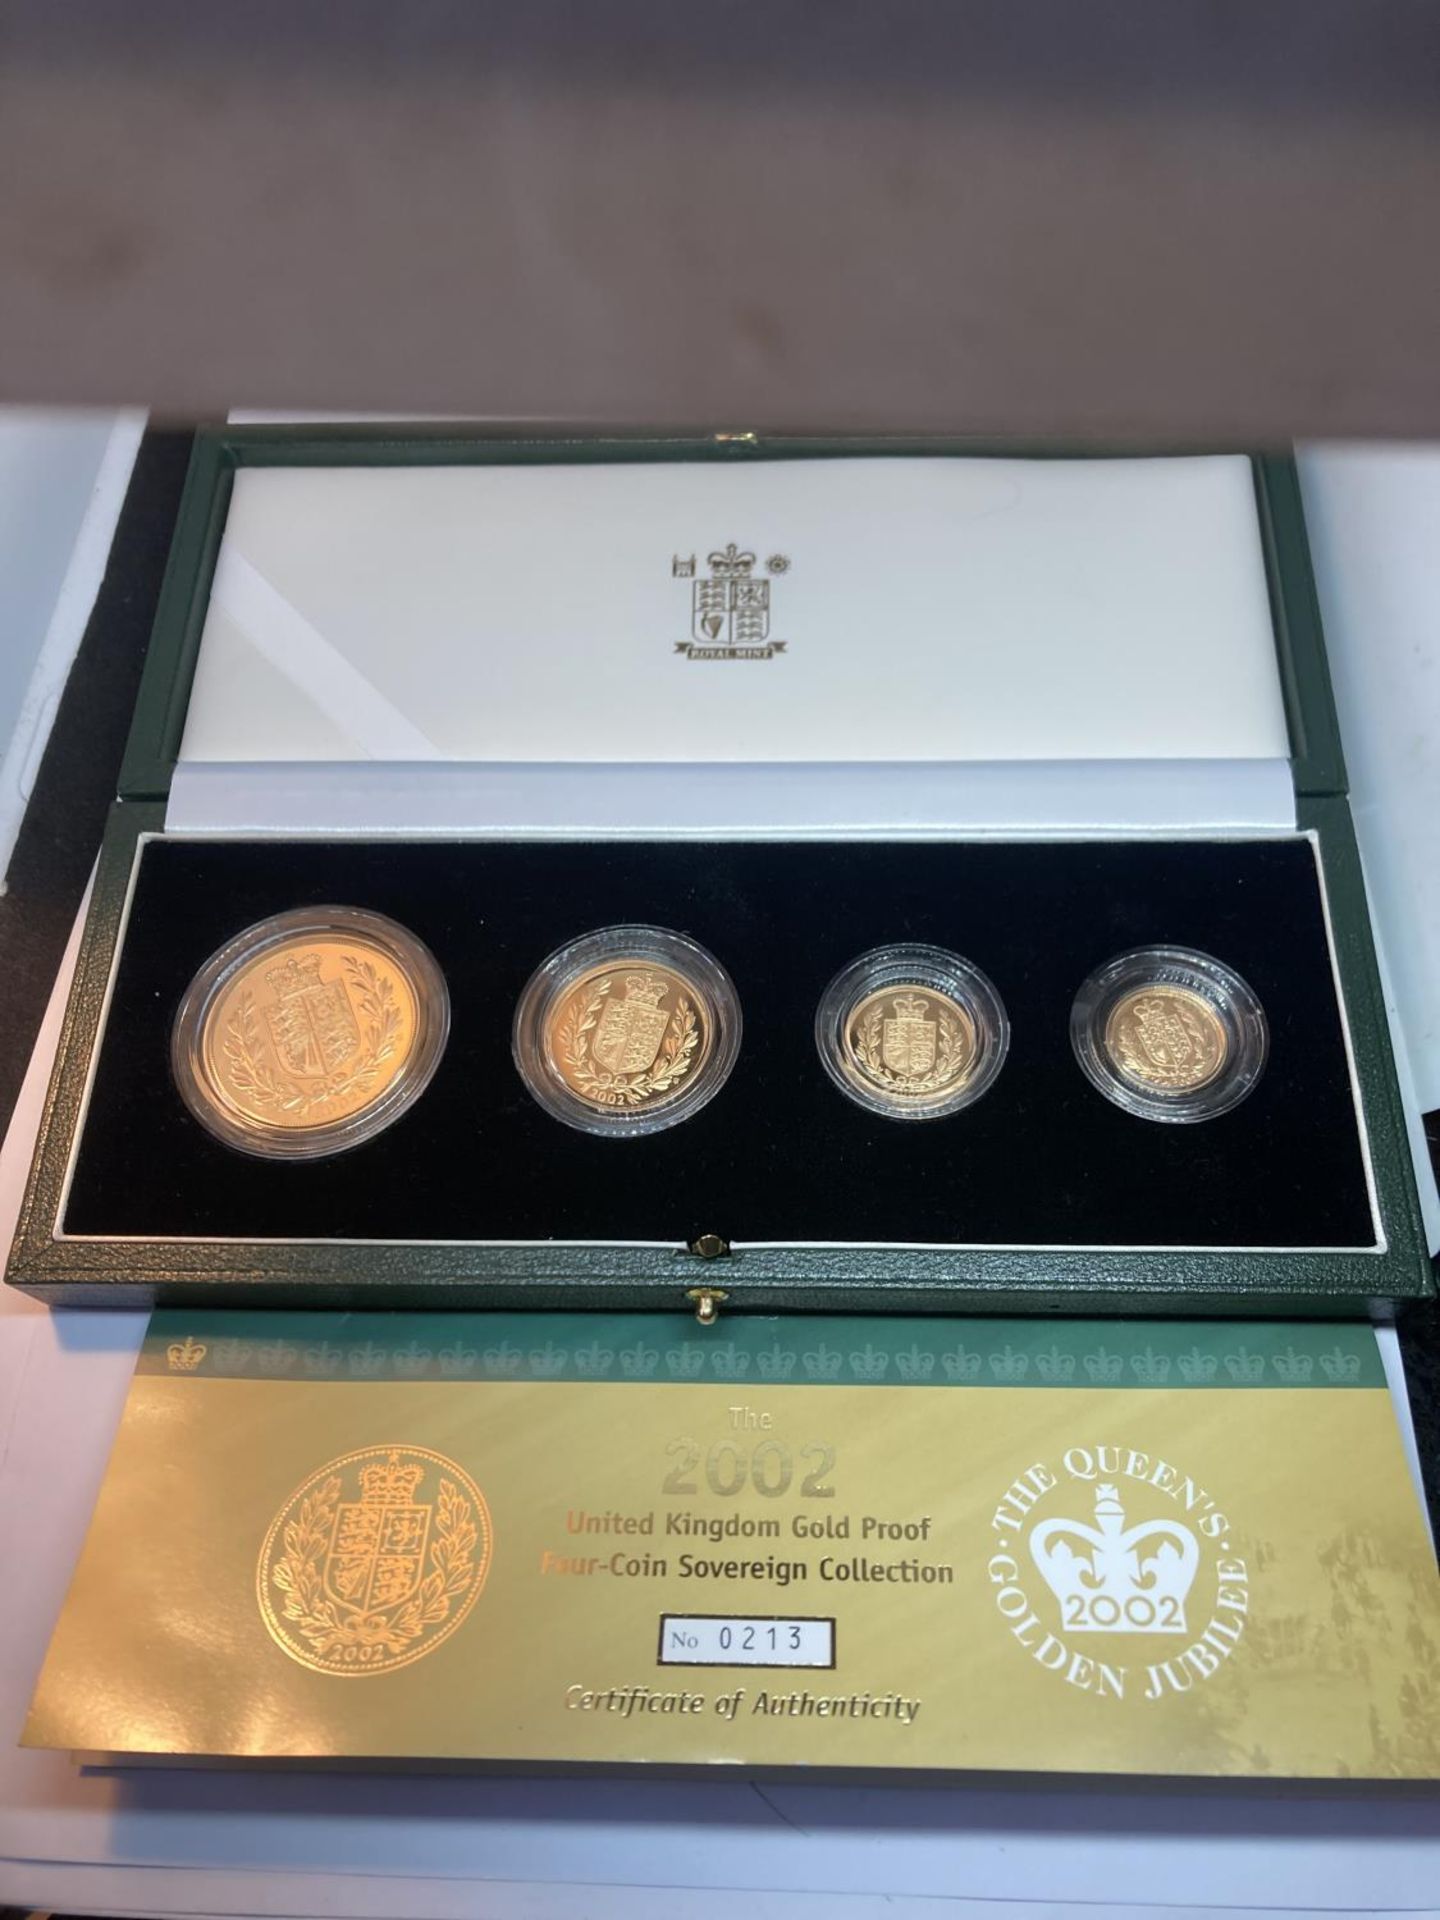 A 2002 ROYAL MINT GOLD PROOF FOUR COIN COLLECTION CELEBRATING QUEEN ELIZABETH II GOLDEN JUBILEE TO